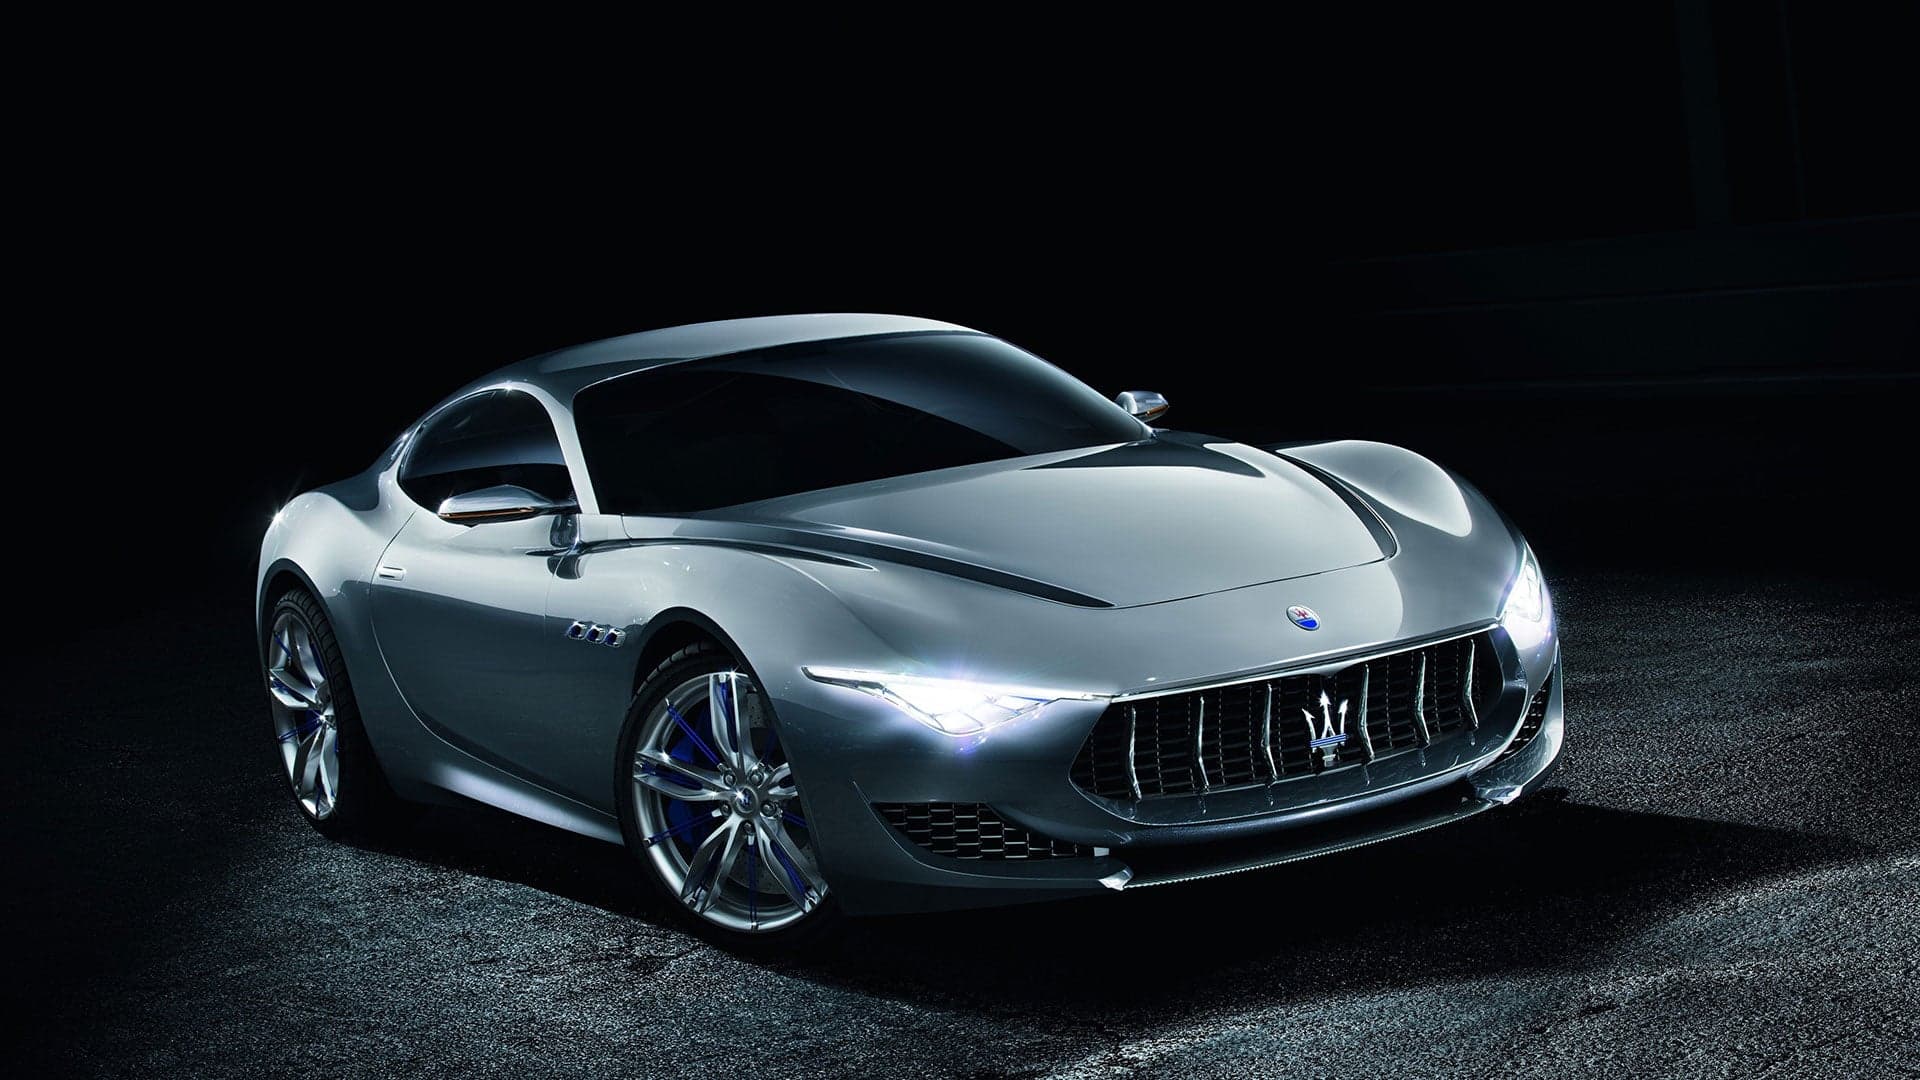 Maserati Could Build a Tesla-Fighting Sports Car, Sergio Marchionne Says